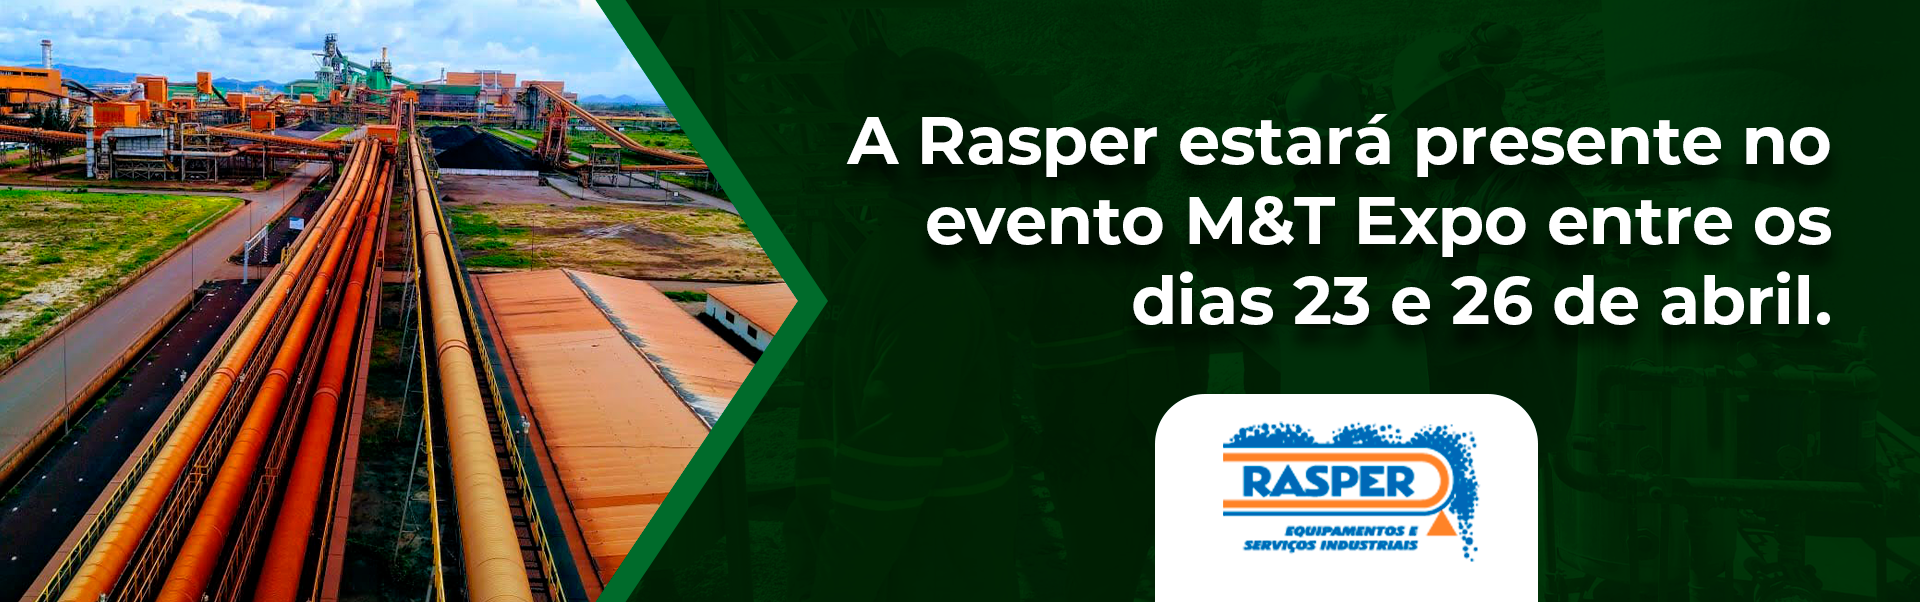 Banner evento M&T Expo